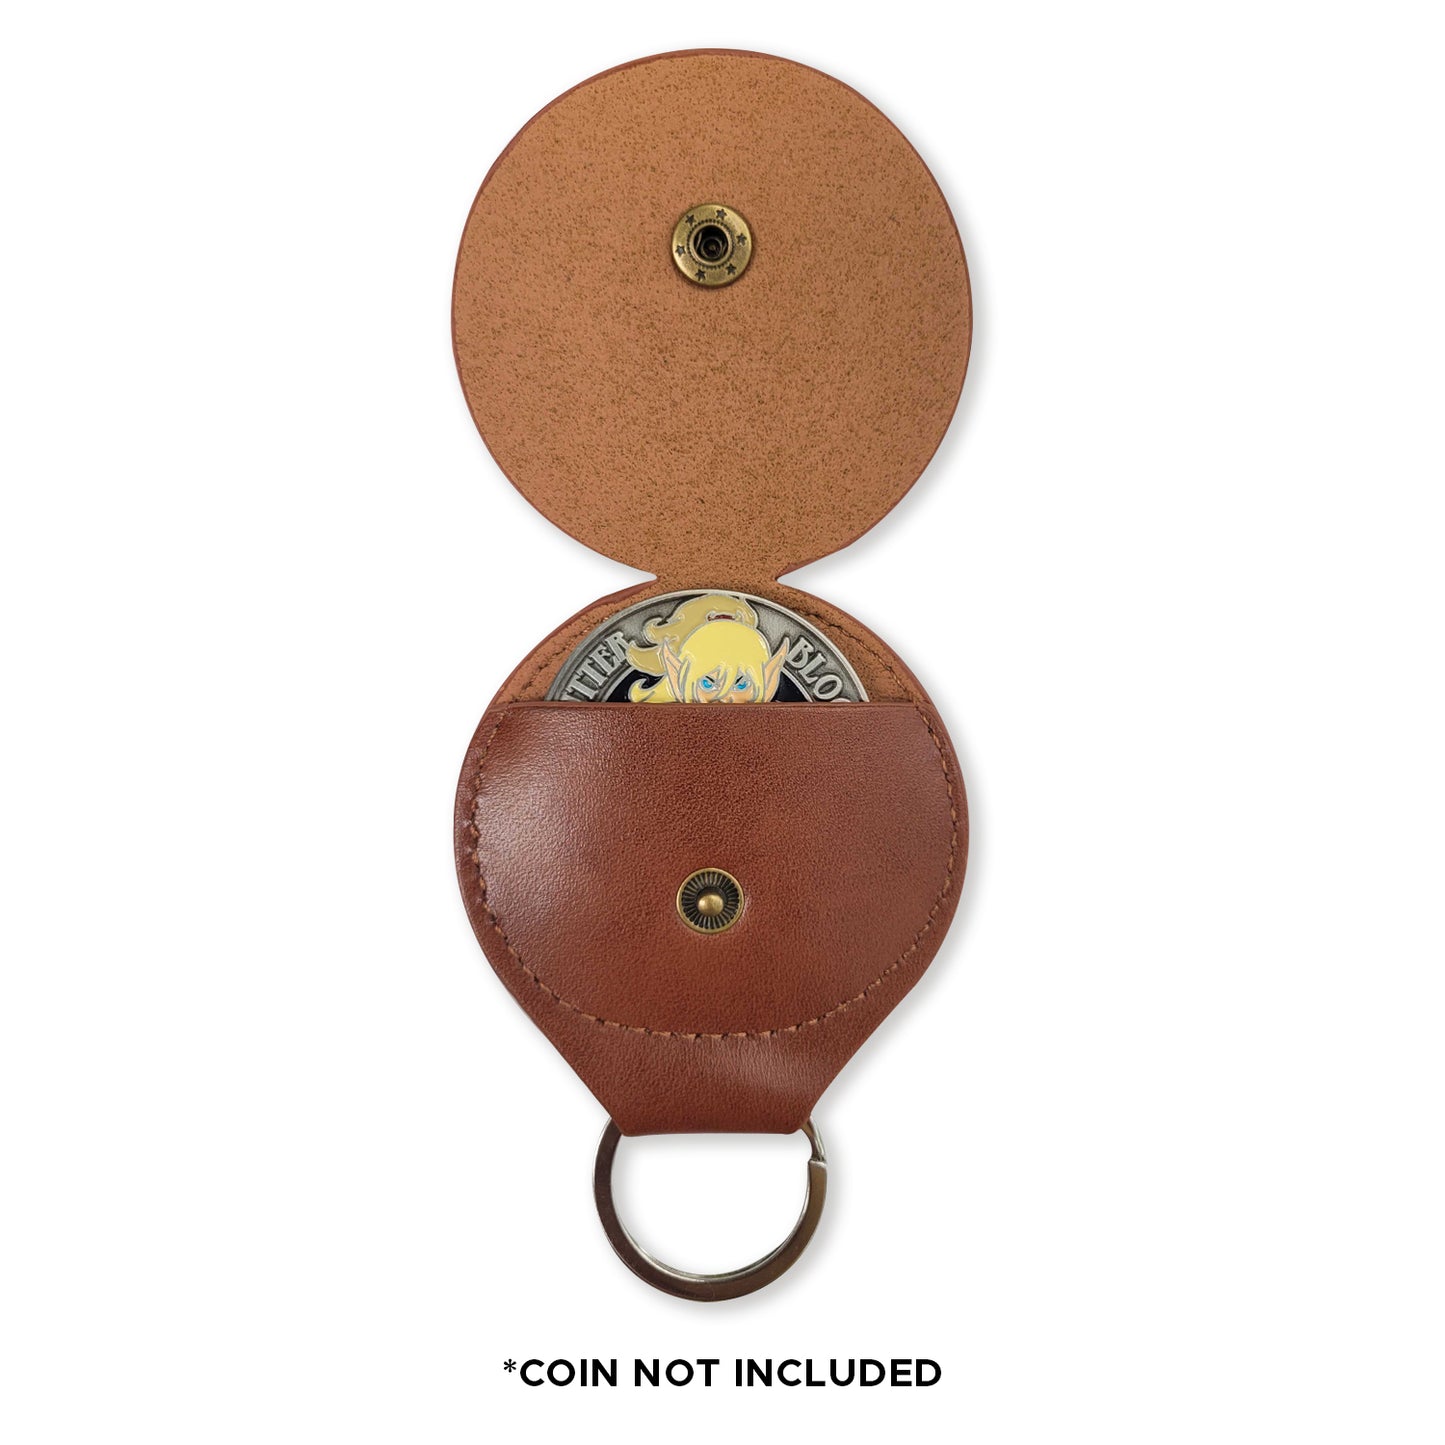 Official ElfQuest Vegan-Leather Coin Holder Keychain – Stands